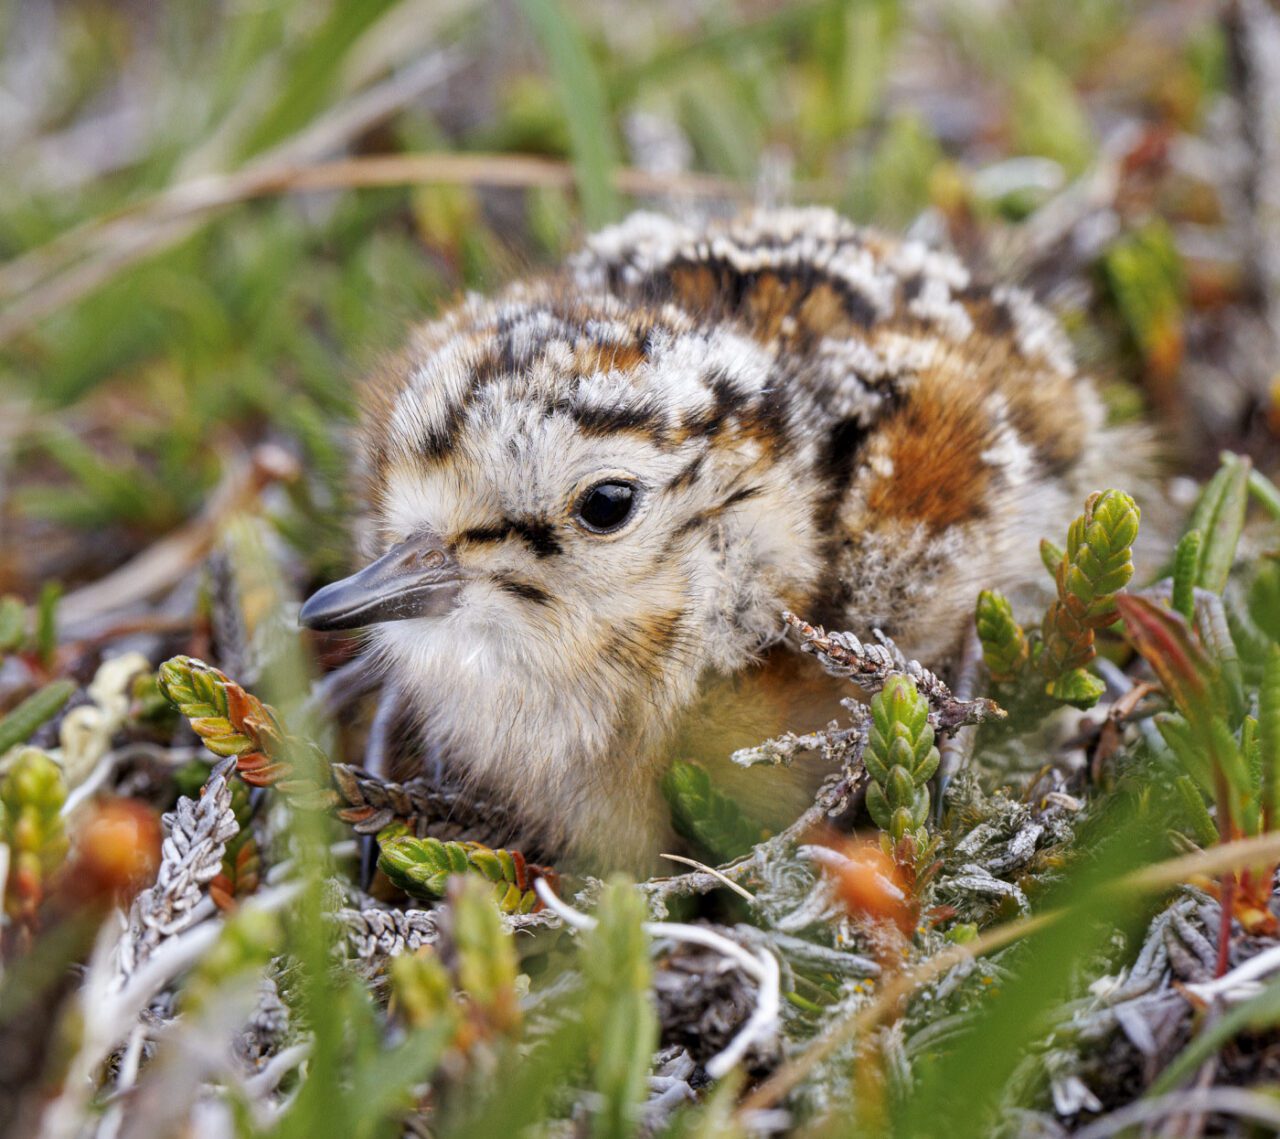 Fluffy cream, brown, and russet chick sits in the grass.